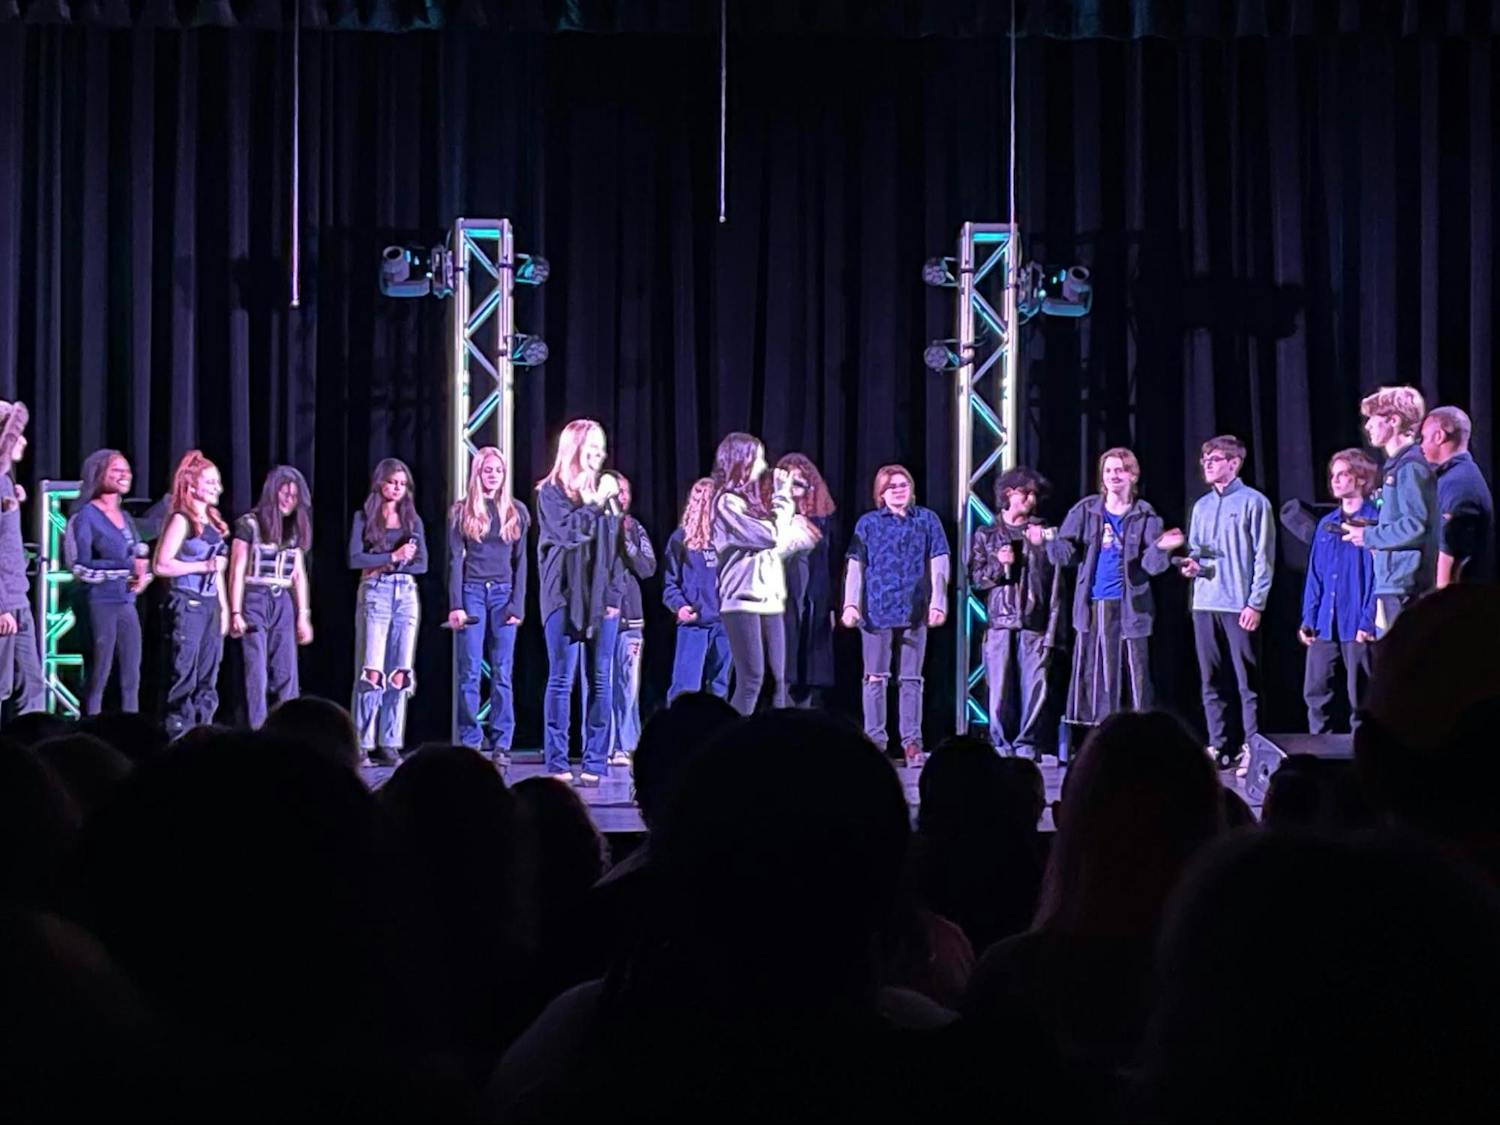 GFS a cappella performing in front of a full auditorium for the annual GFS a cappella invitational fest in February | Source: Germantown Friends School 